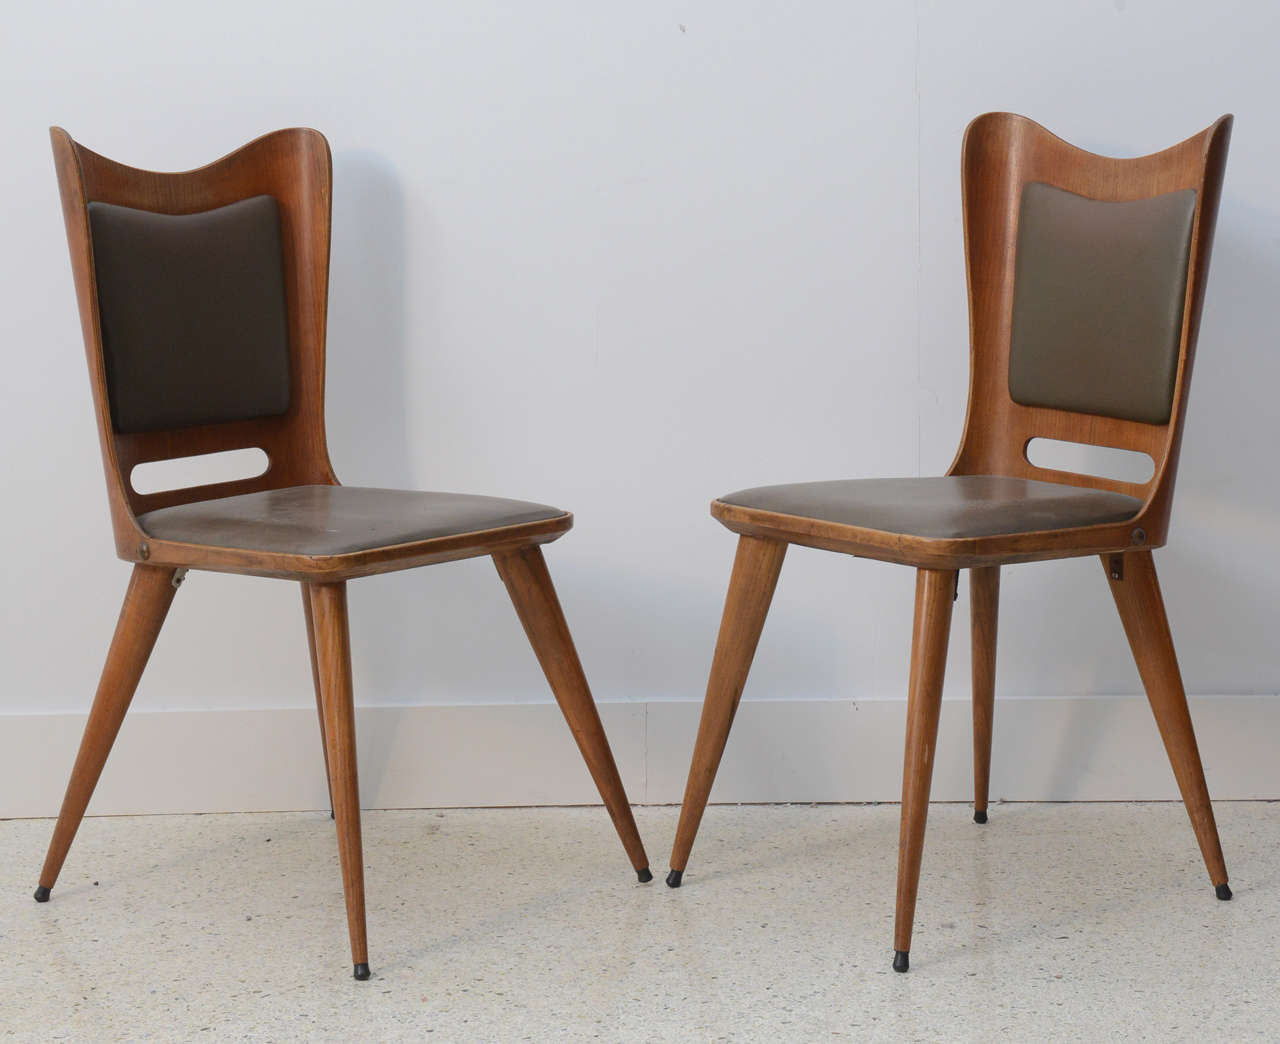 Pair of Italian Modern Walnut Side Chairs, Guglielmo Ulrich In Excellent Condition For Sale In Hollywood, FL